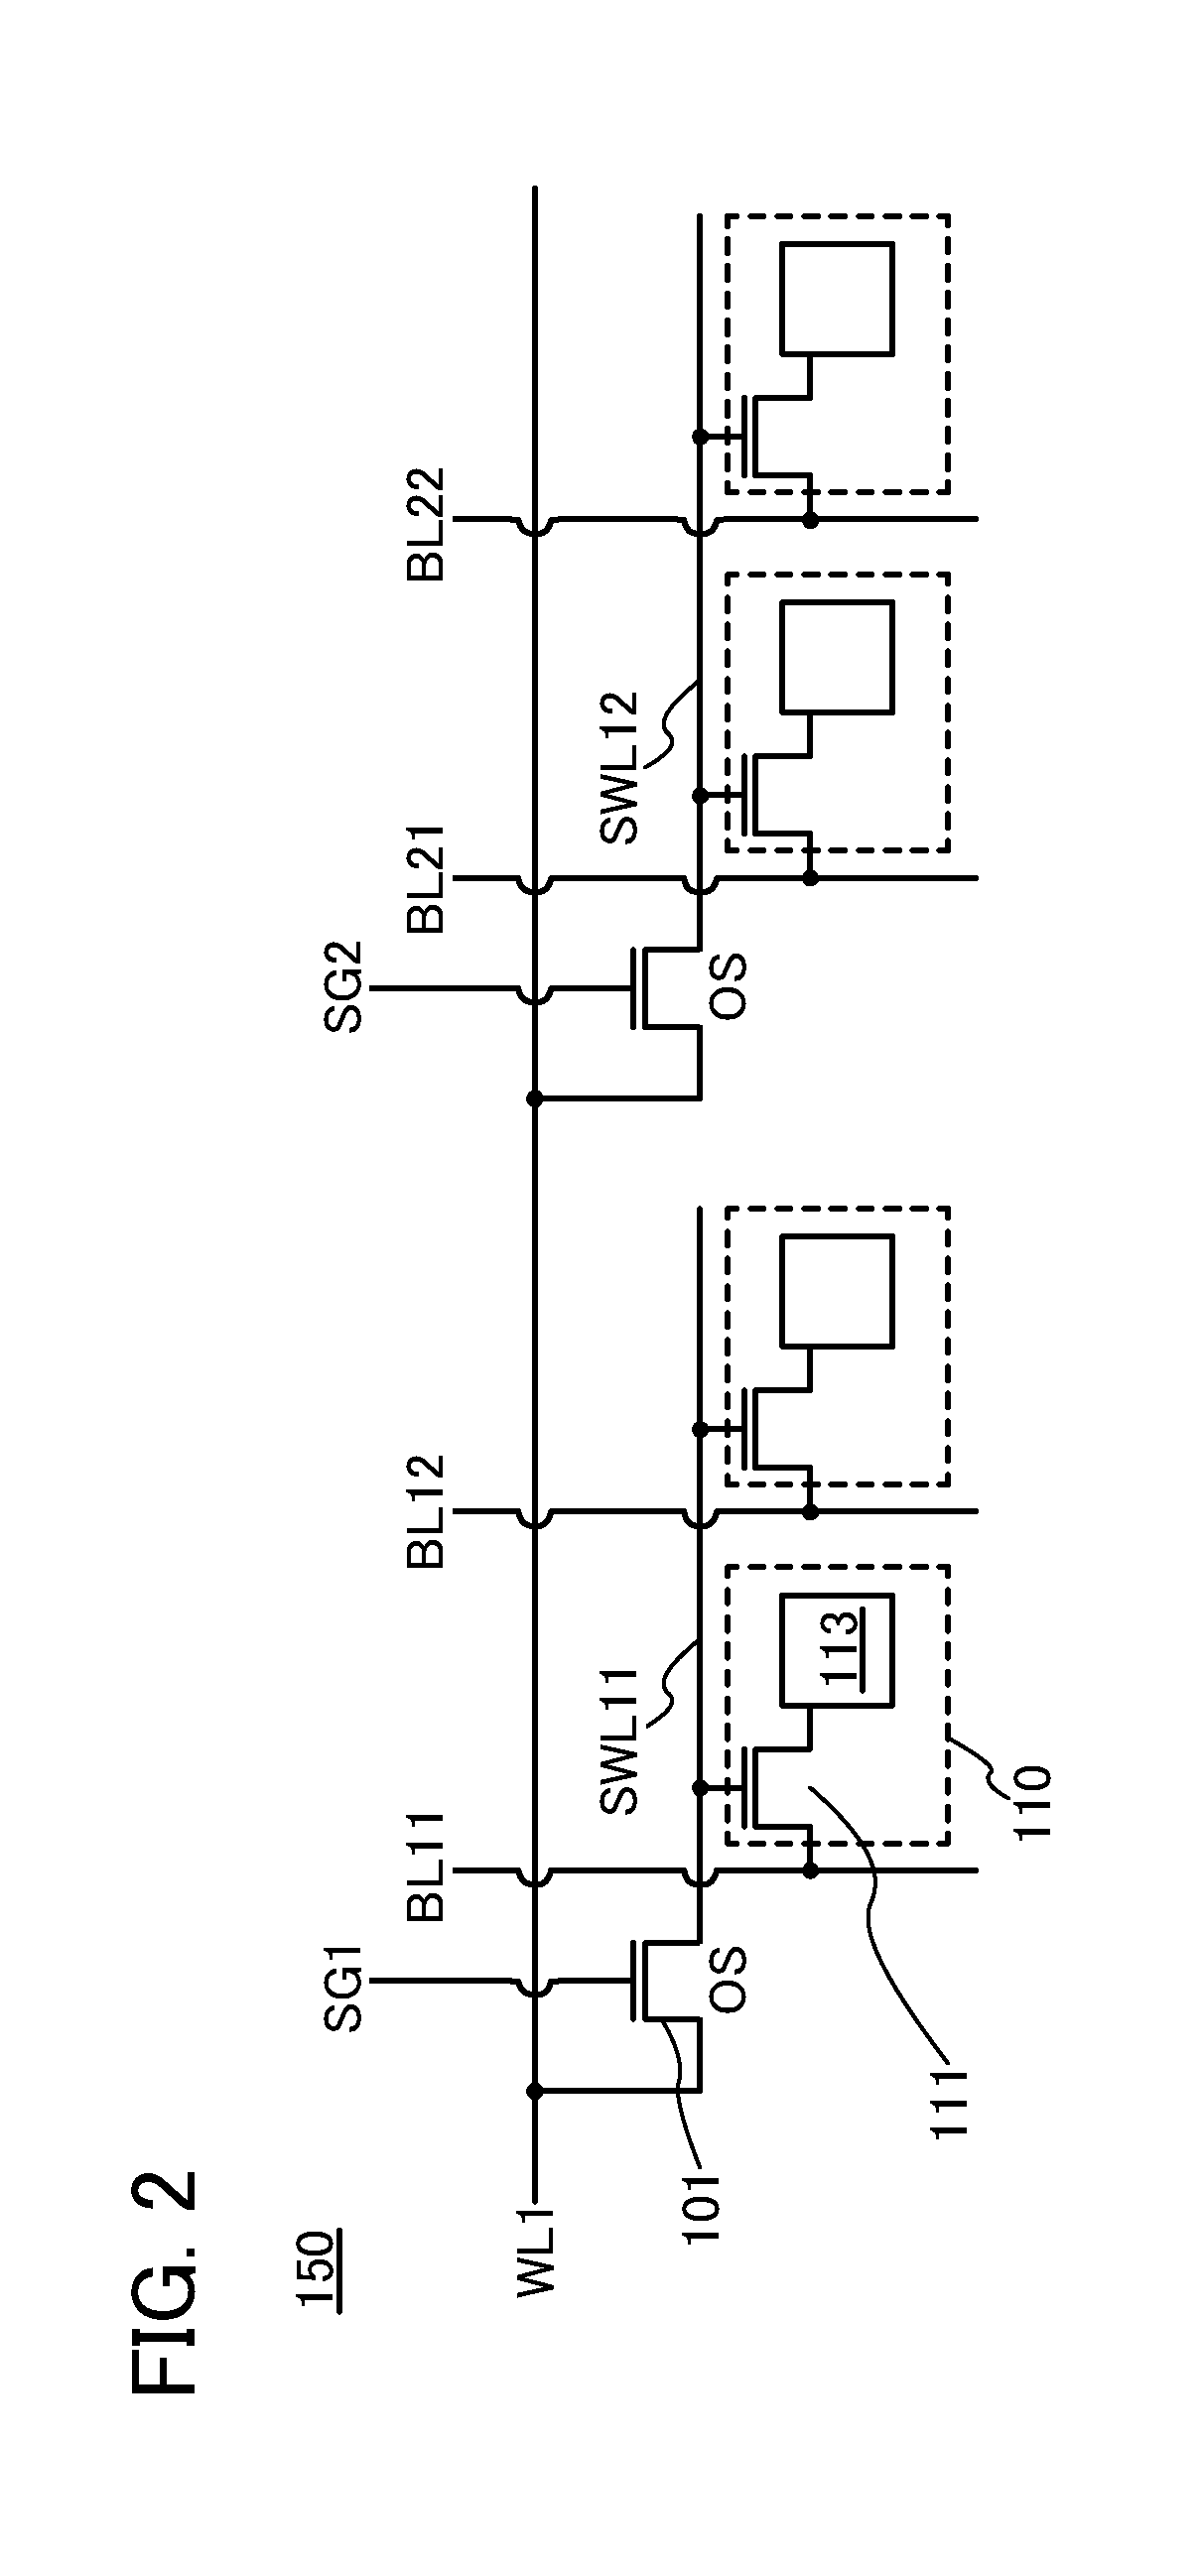 Word line divider and storage device